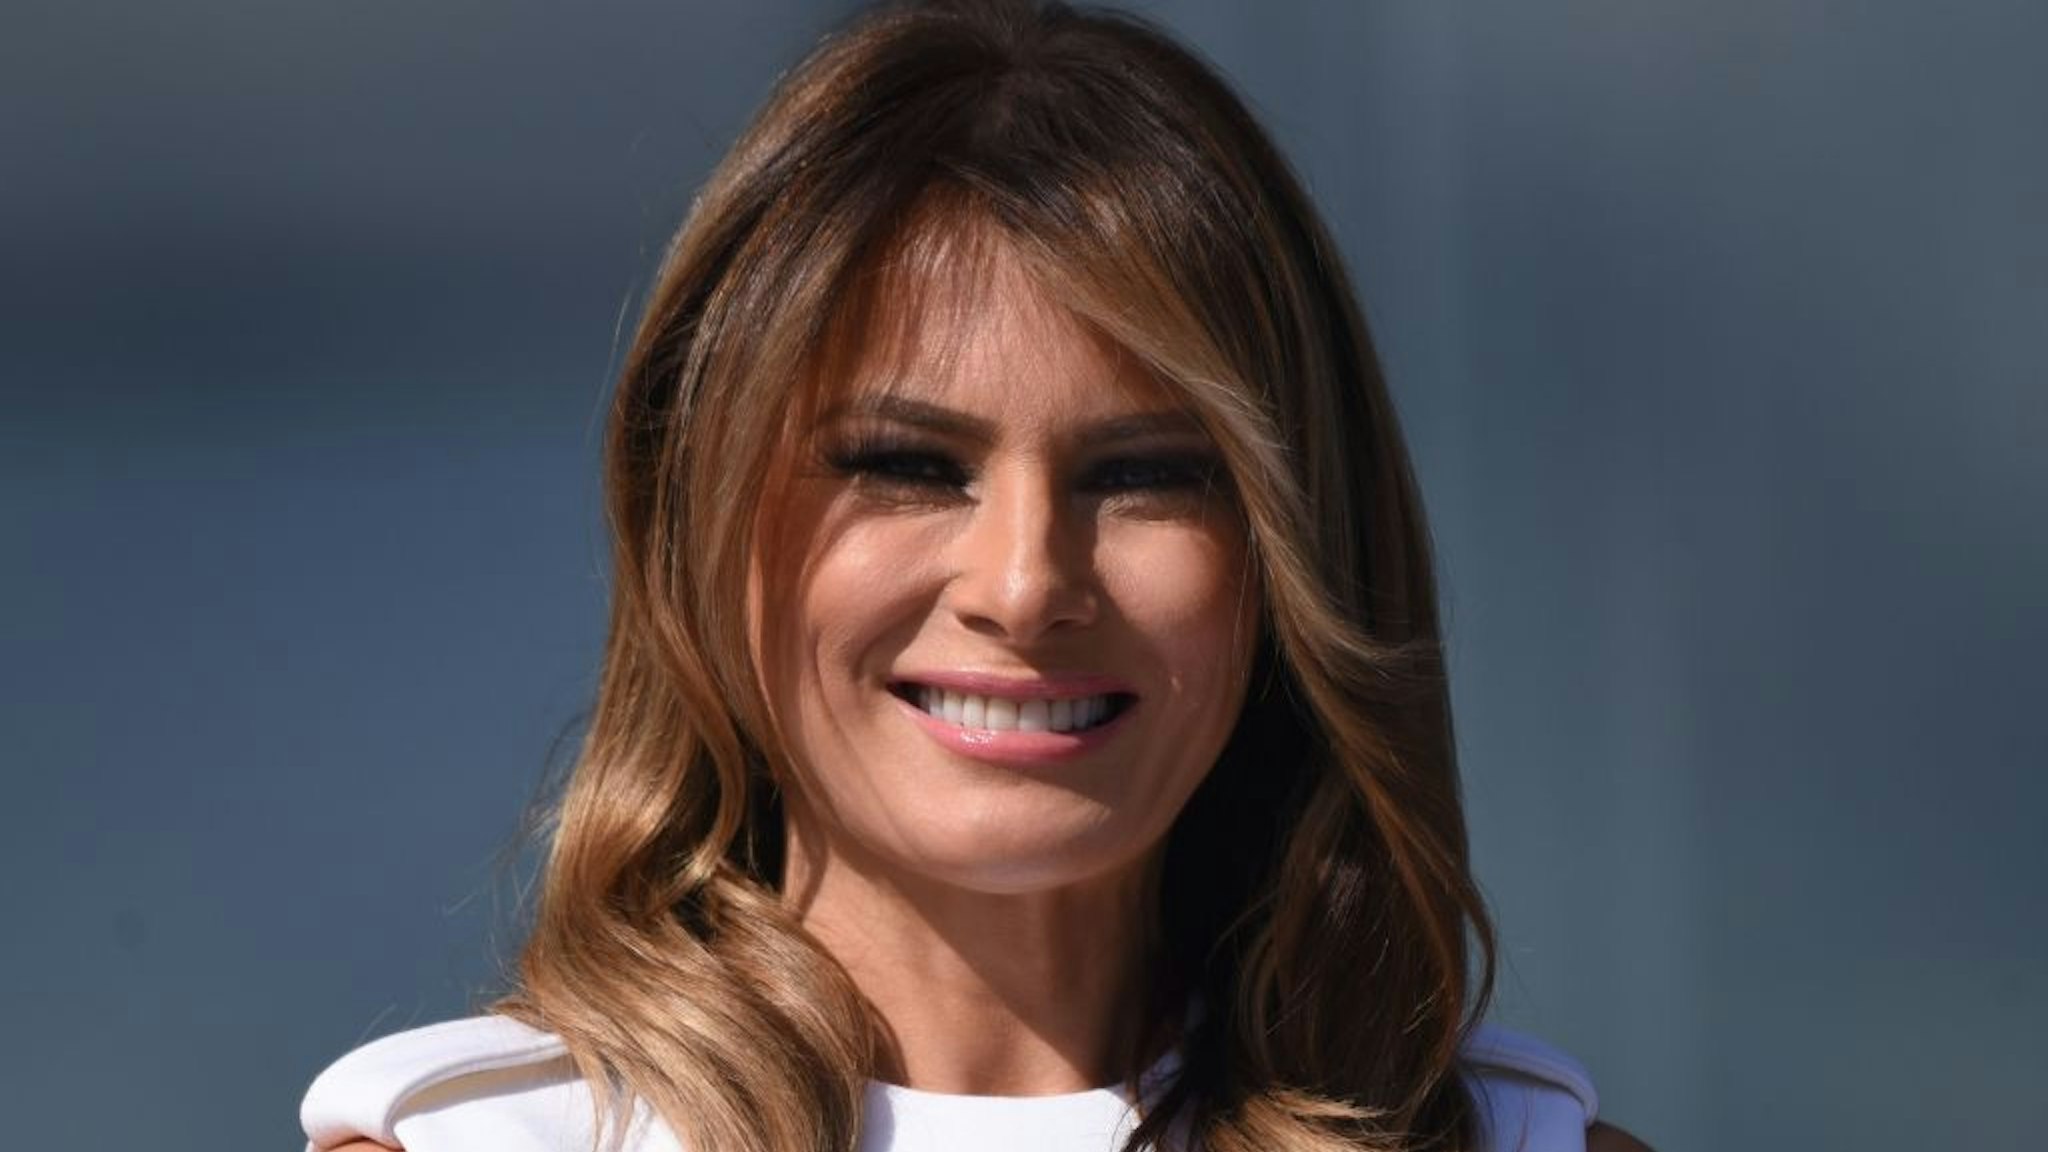 US First Lady Melania Trump looks during the reopening of the Washington Monument on the National Mall on September 19, 2019 in Washington, DC.